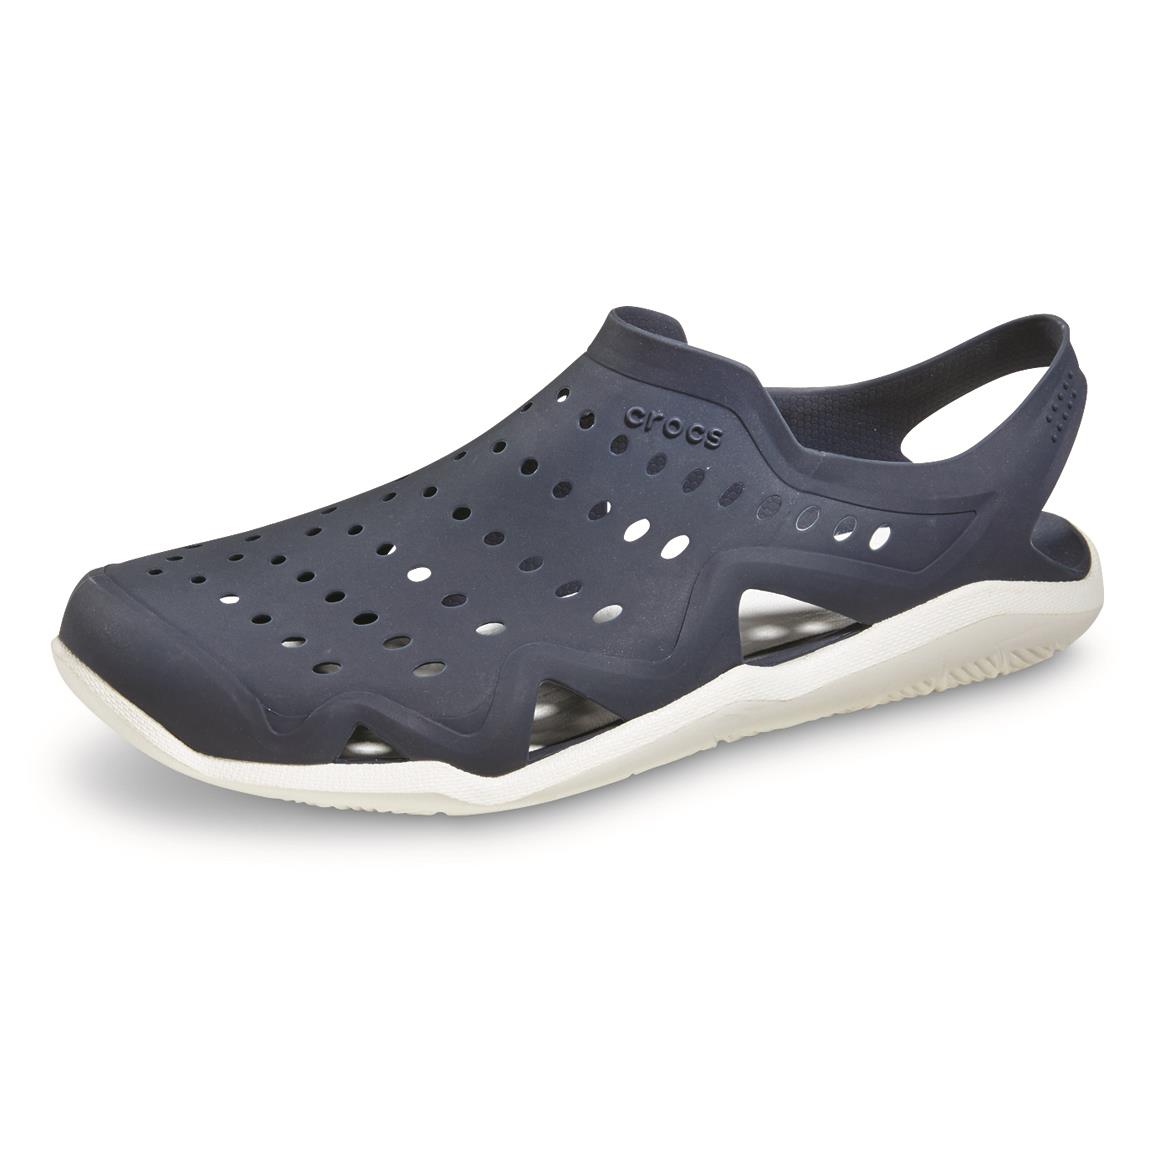 crocs swiftwater wave weight